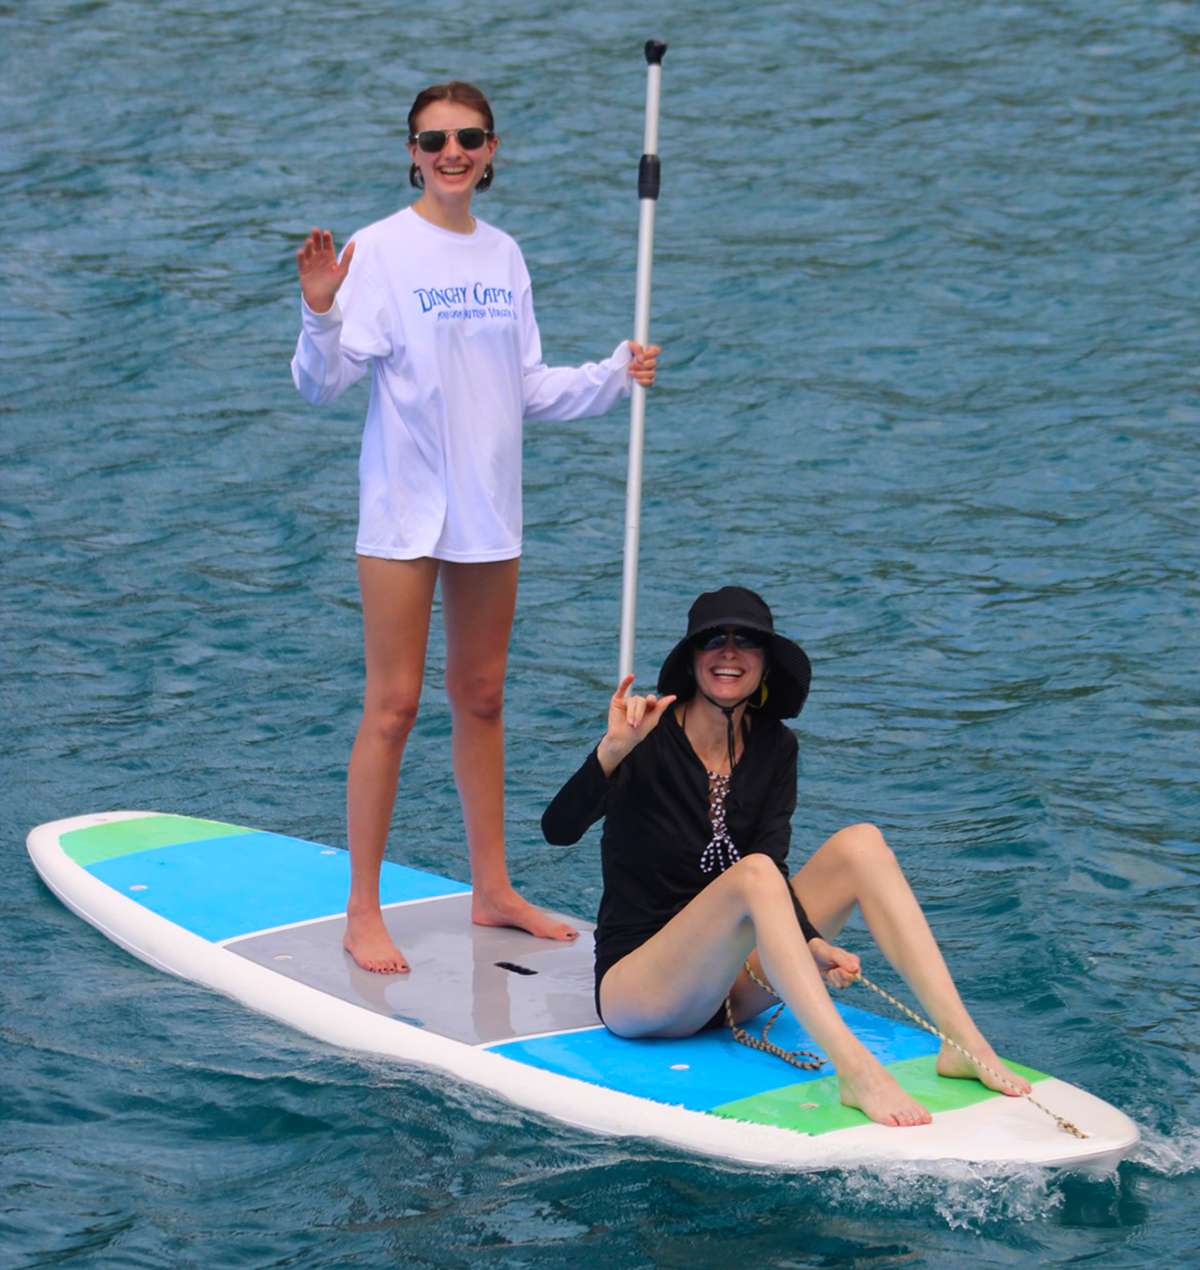 Two identical paddle boards are available for guests.